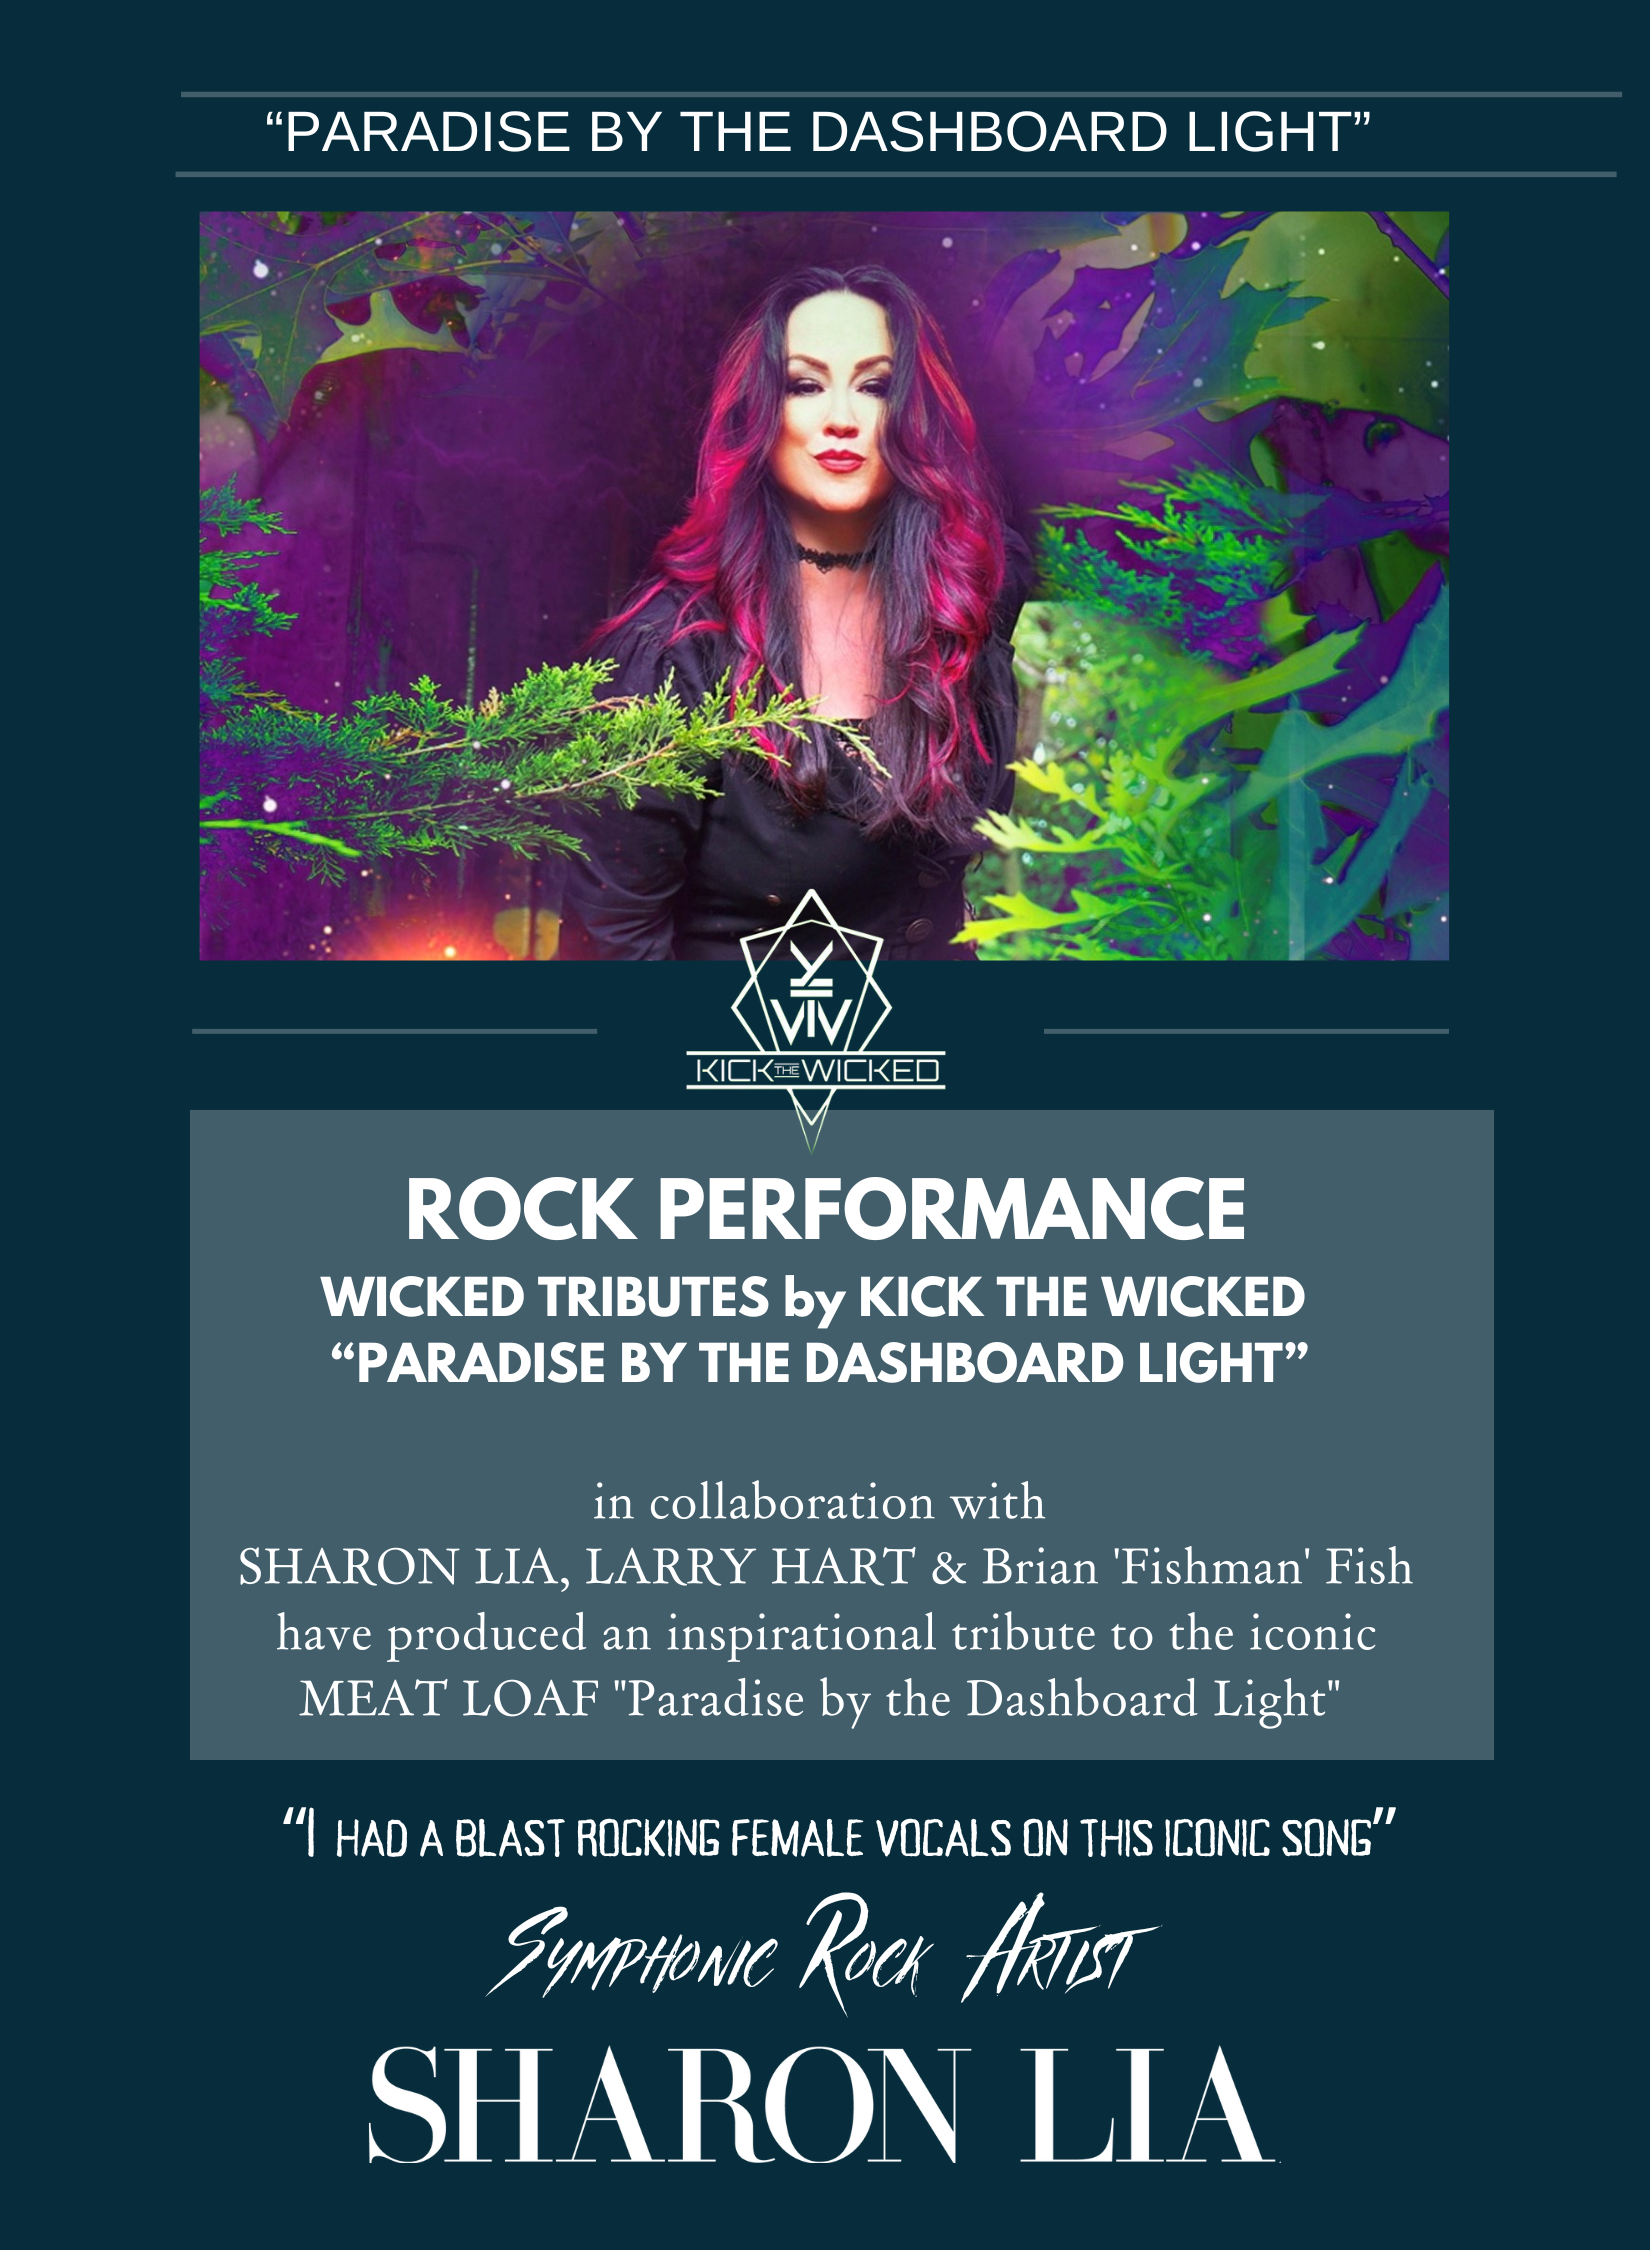 ROCK PERFORMANCE WICKED TRIBUTES BY KICK THE WICKED “PARADISE BY THE DASHBOARD LIGHT” Wicked Tributes by Kick The Wicked in collaboration with SHARON LIA, LARRY HART & Brian 'Fishman' Fish have pr (2)